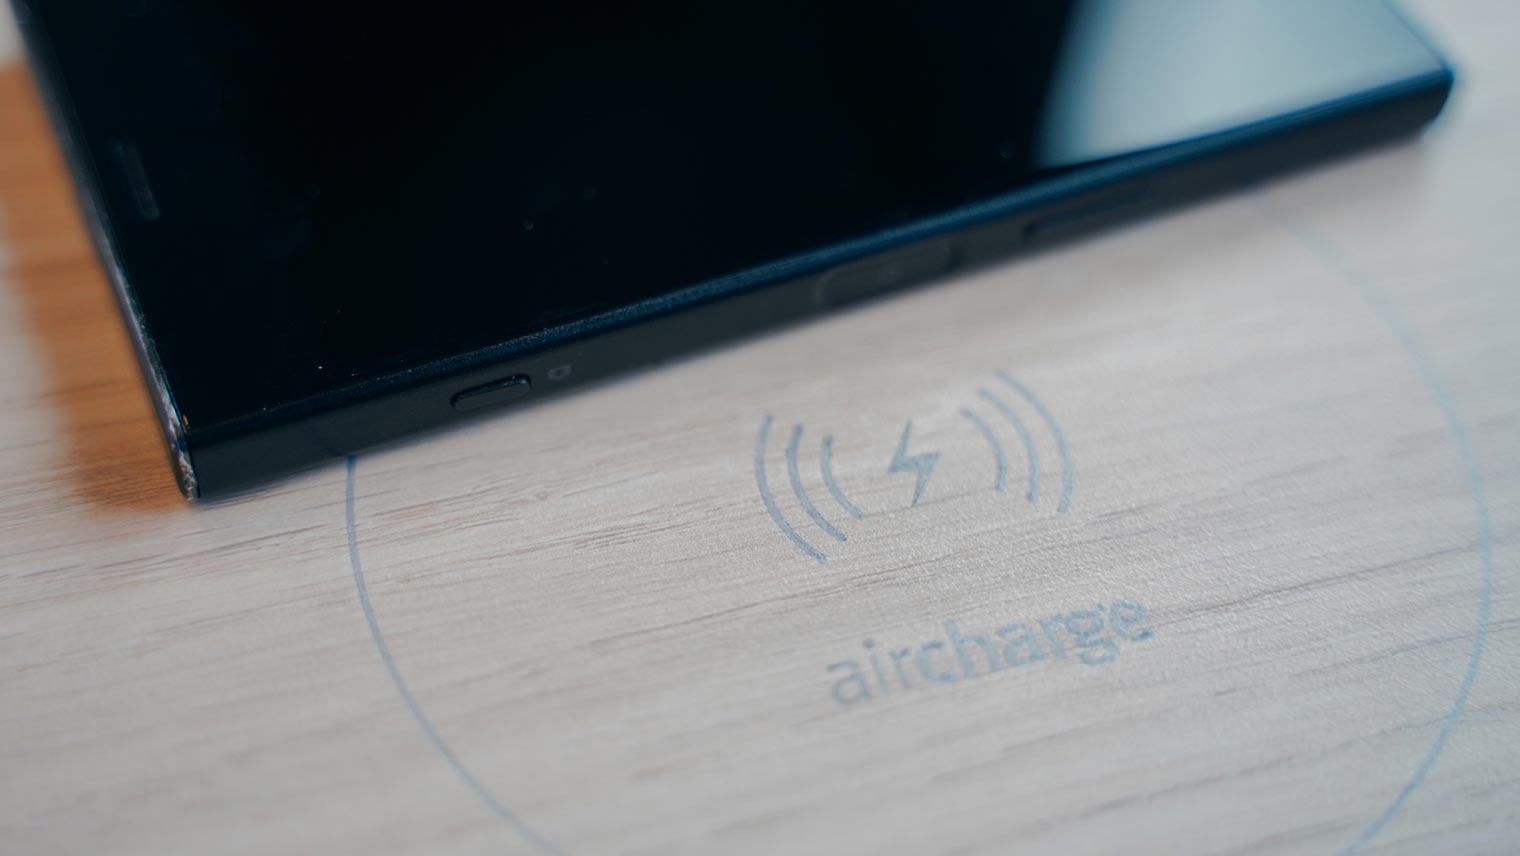 SWR First Class Aircharge